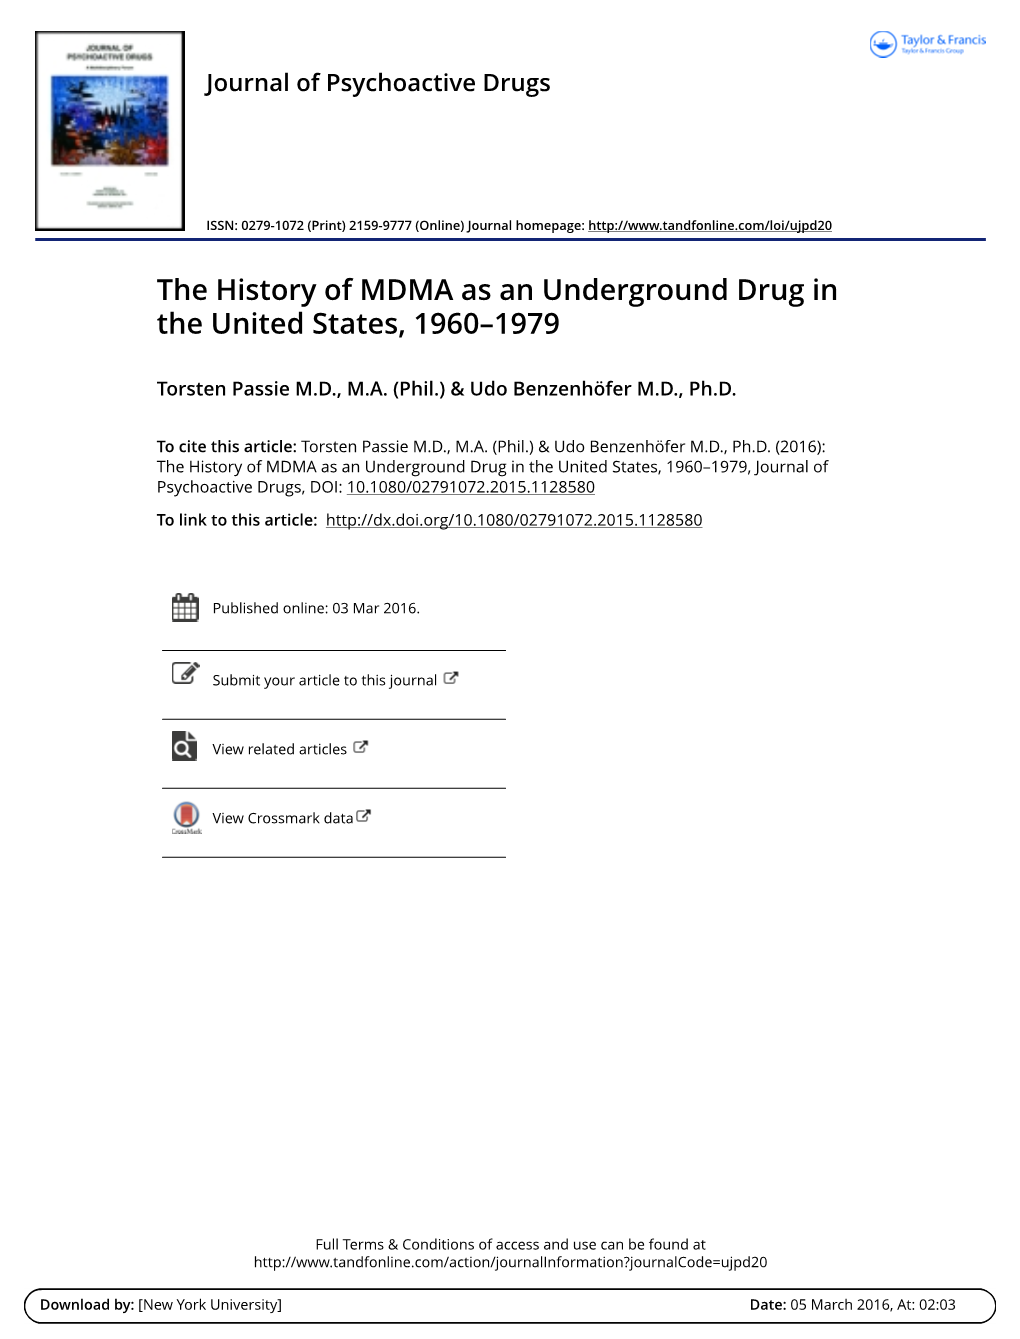 The History of MDMA As an Underground Drug in the United States, 1960–1979